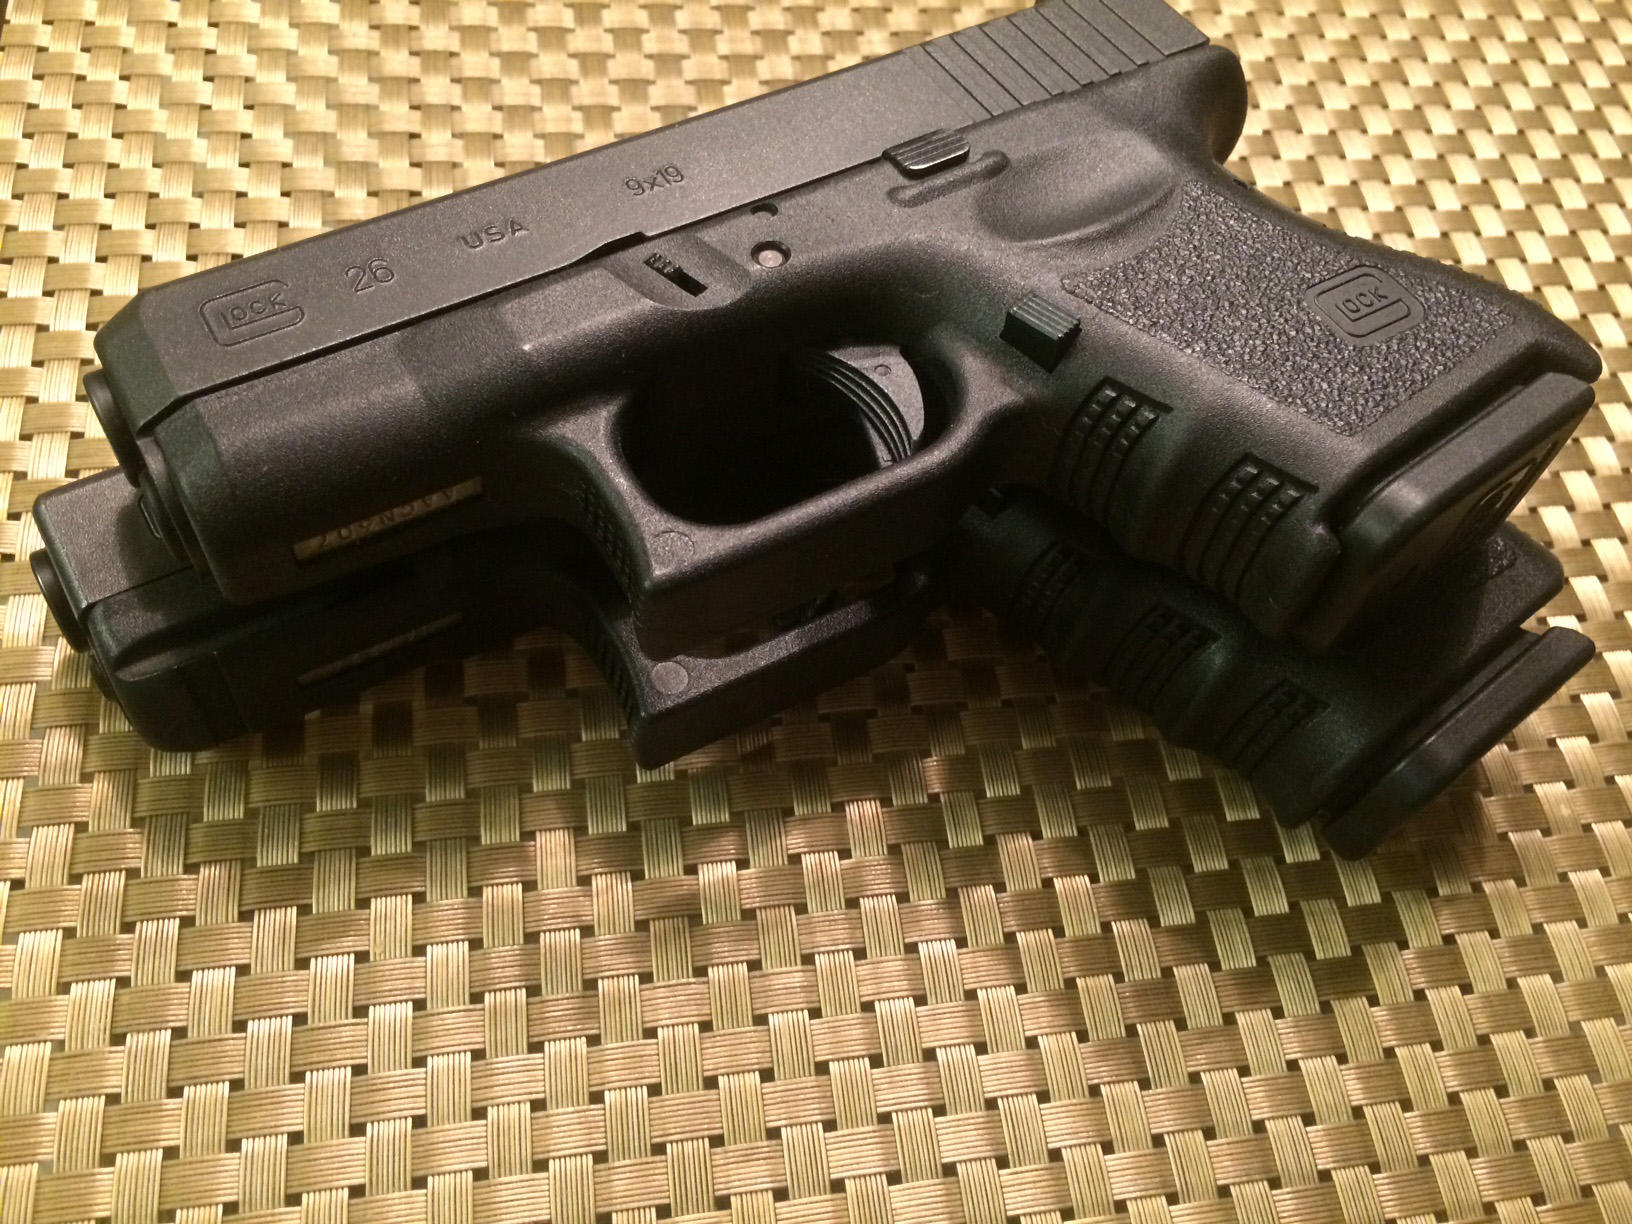 Glock Compact vs for Summer Carry Prepper.